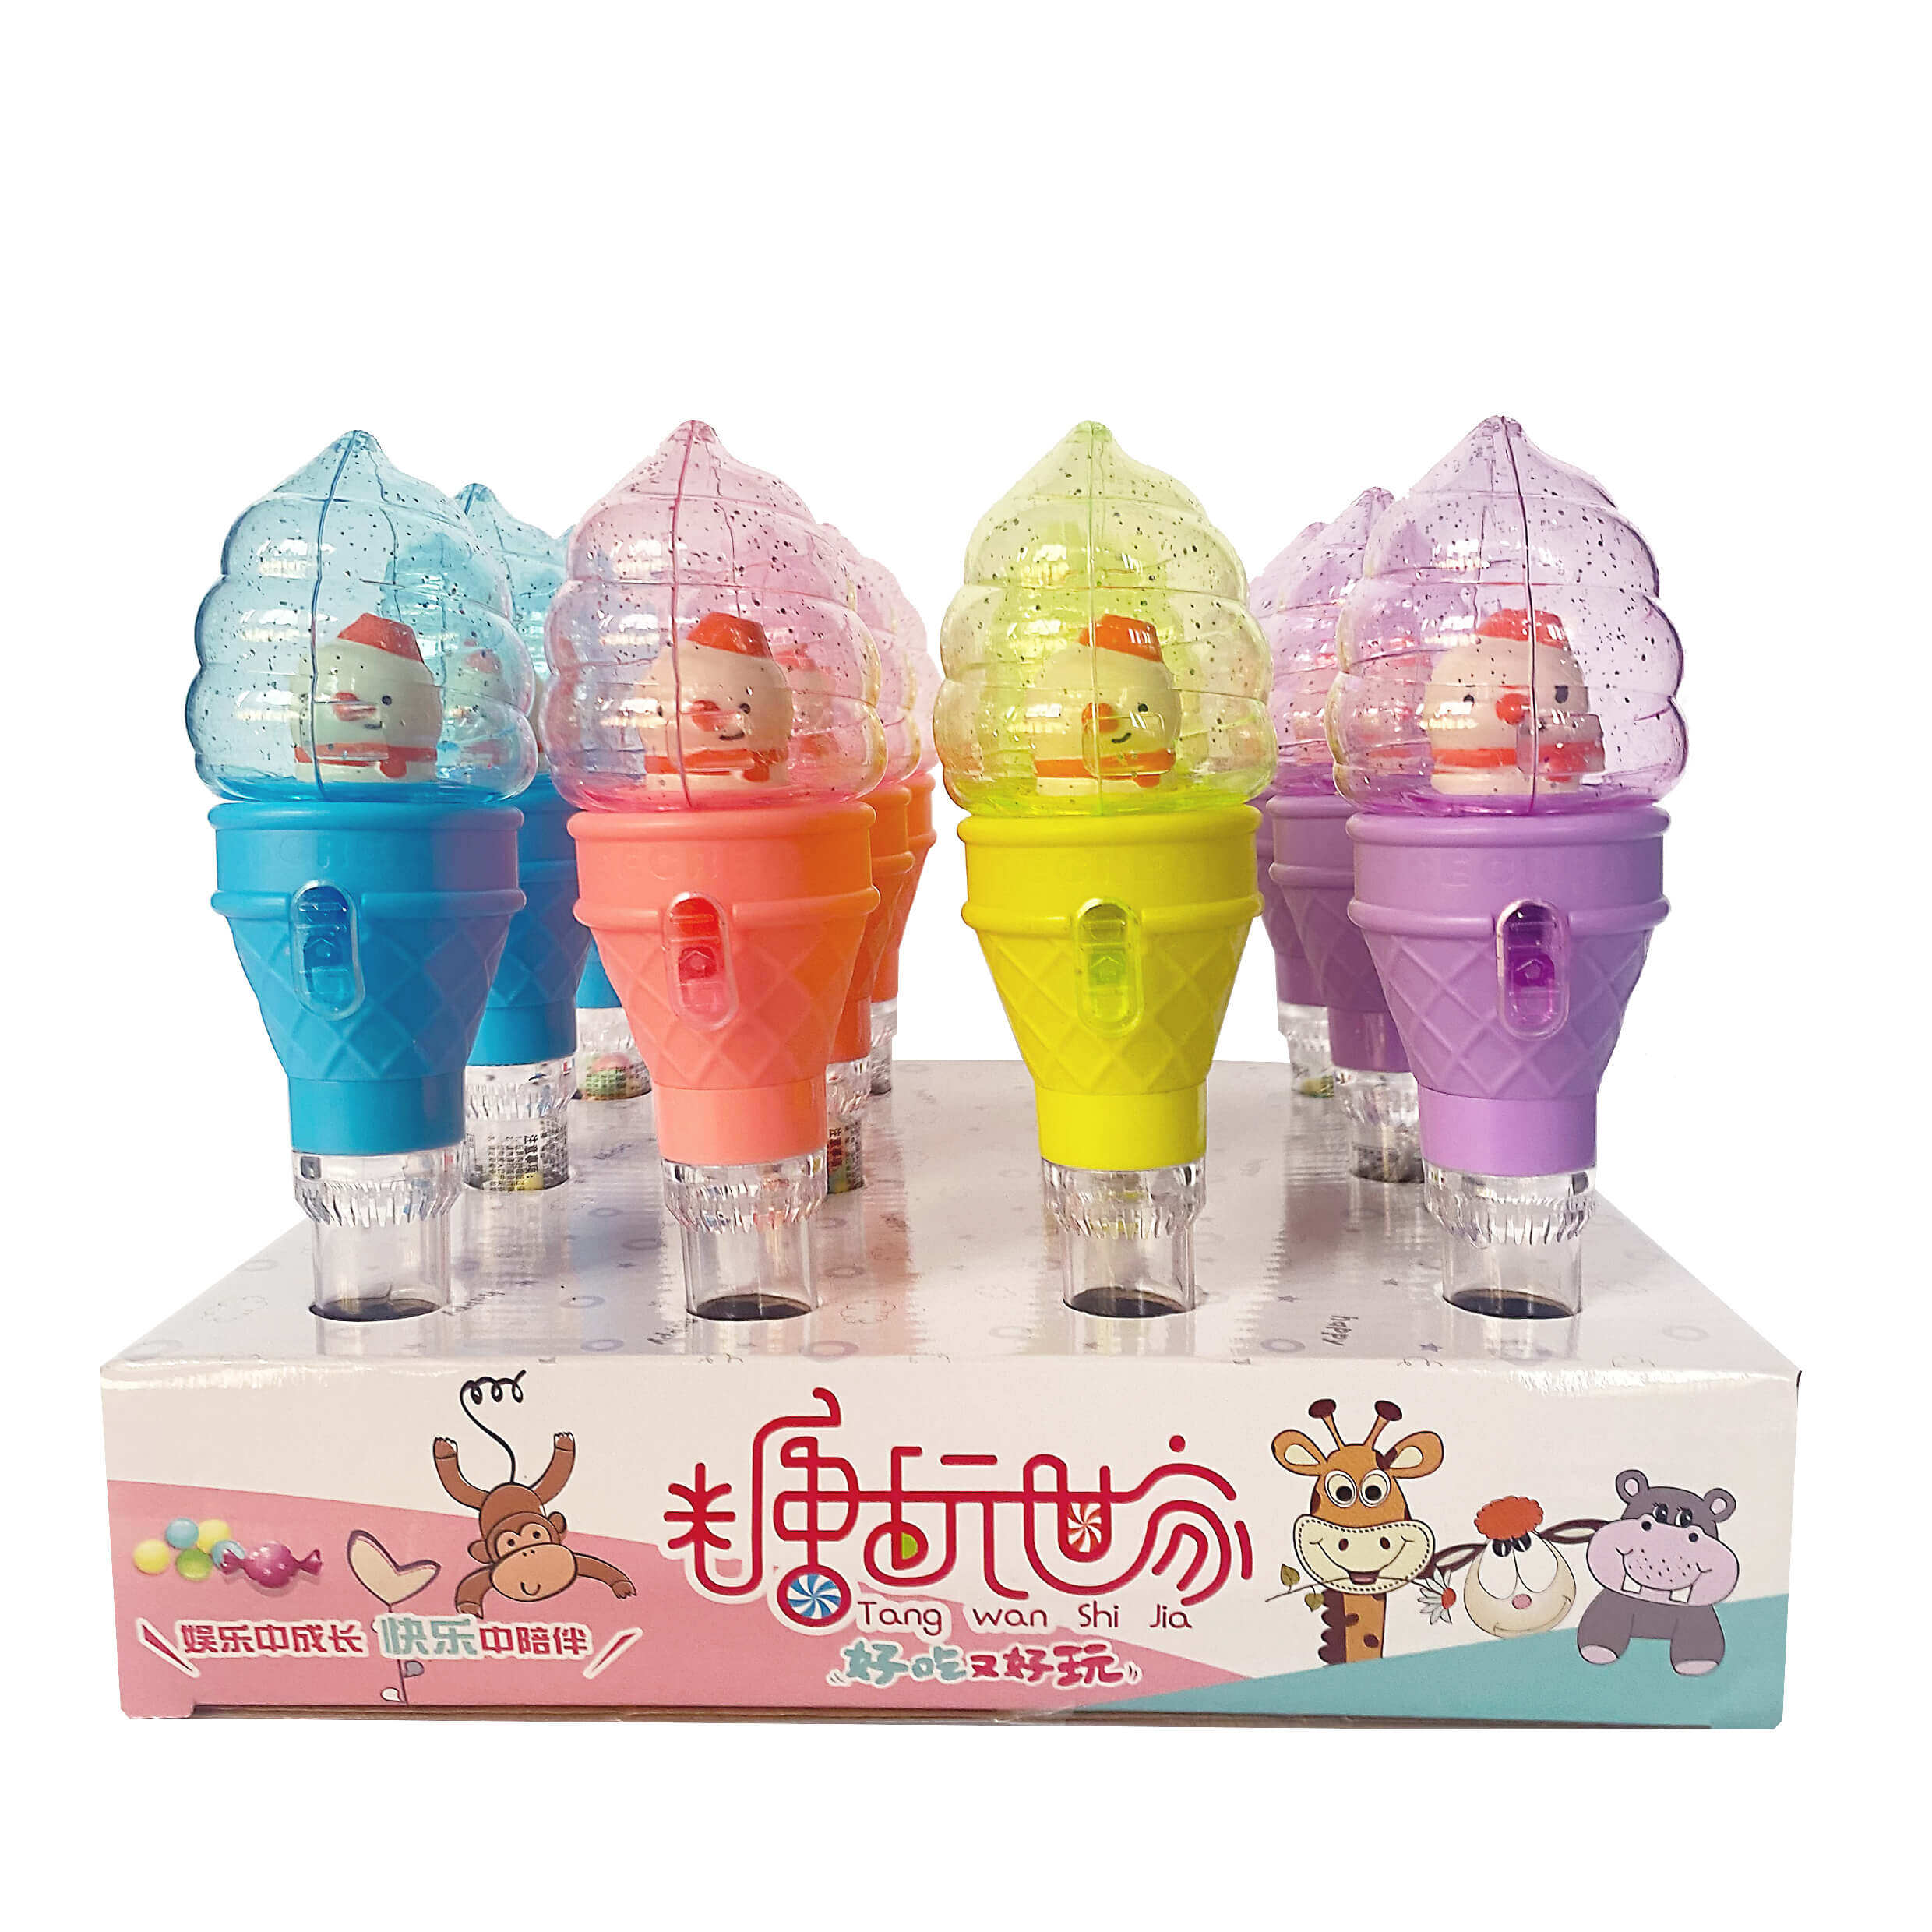 plastic candy tubes wholesale, cute candy dispenser, personalized candy dispenser